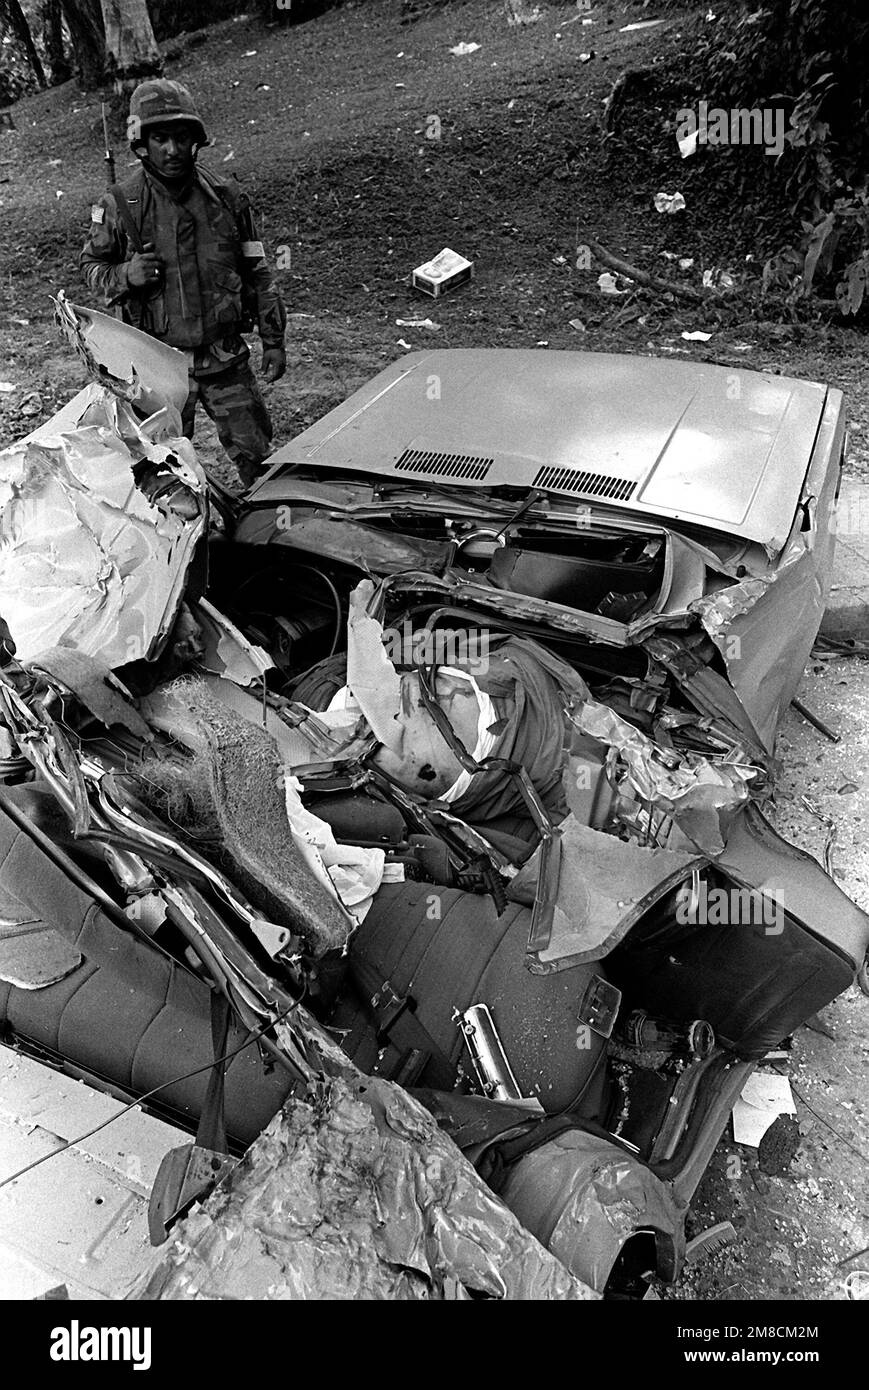 During the second day of Operation Just Cause, a U.S. Army soldier inspects an automobile that was used by the Panamanian Defense Force to transport weapons until it was run over by an American armored personnel carrier. Subject Operation/Series: JUST CAUSE Base: Panama City Country: Panama (PAN) Stock Photo